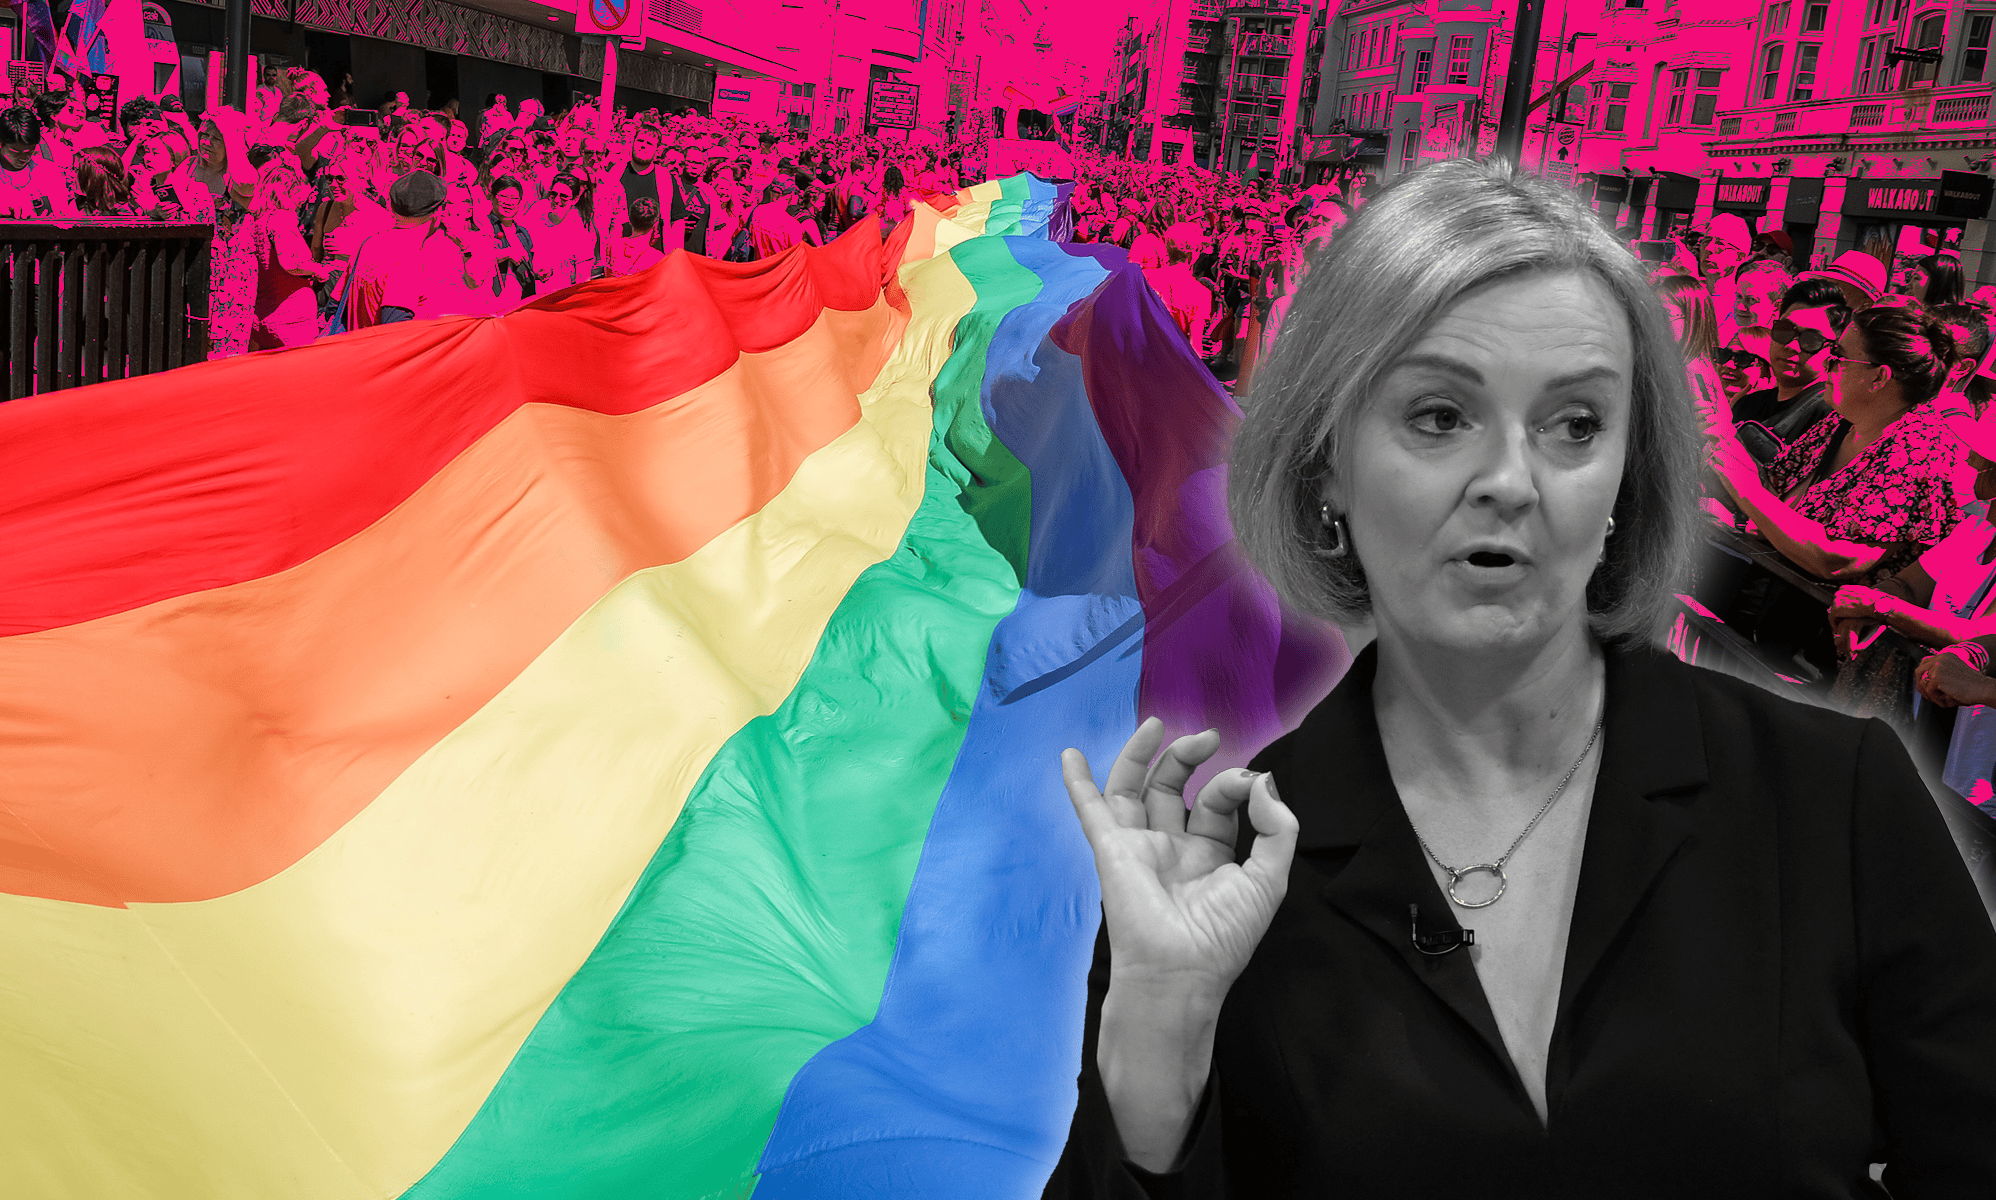 A graphic depicting Liz Truss in front of LGBTQ+ advocates